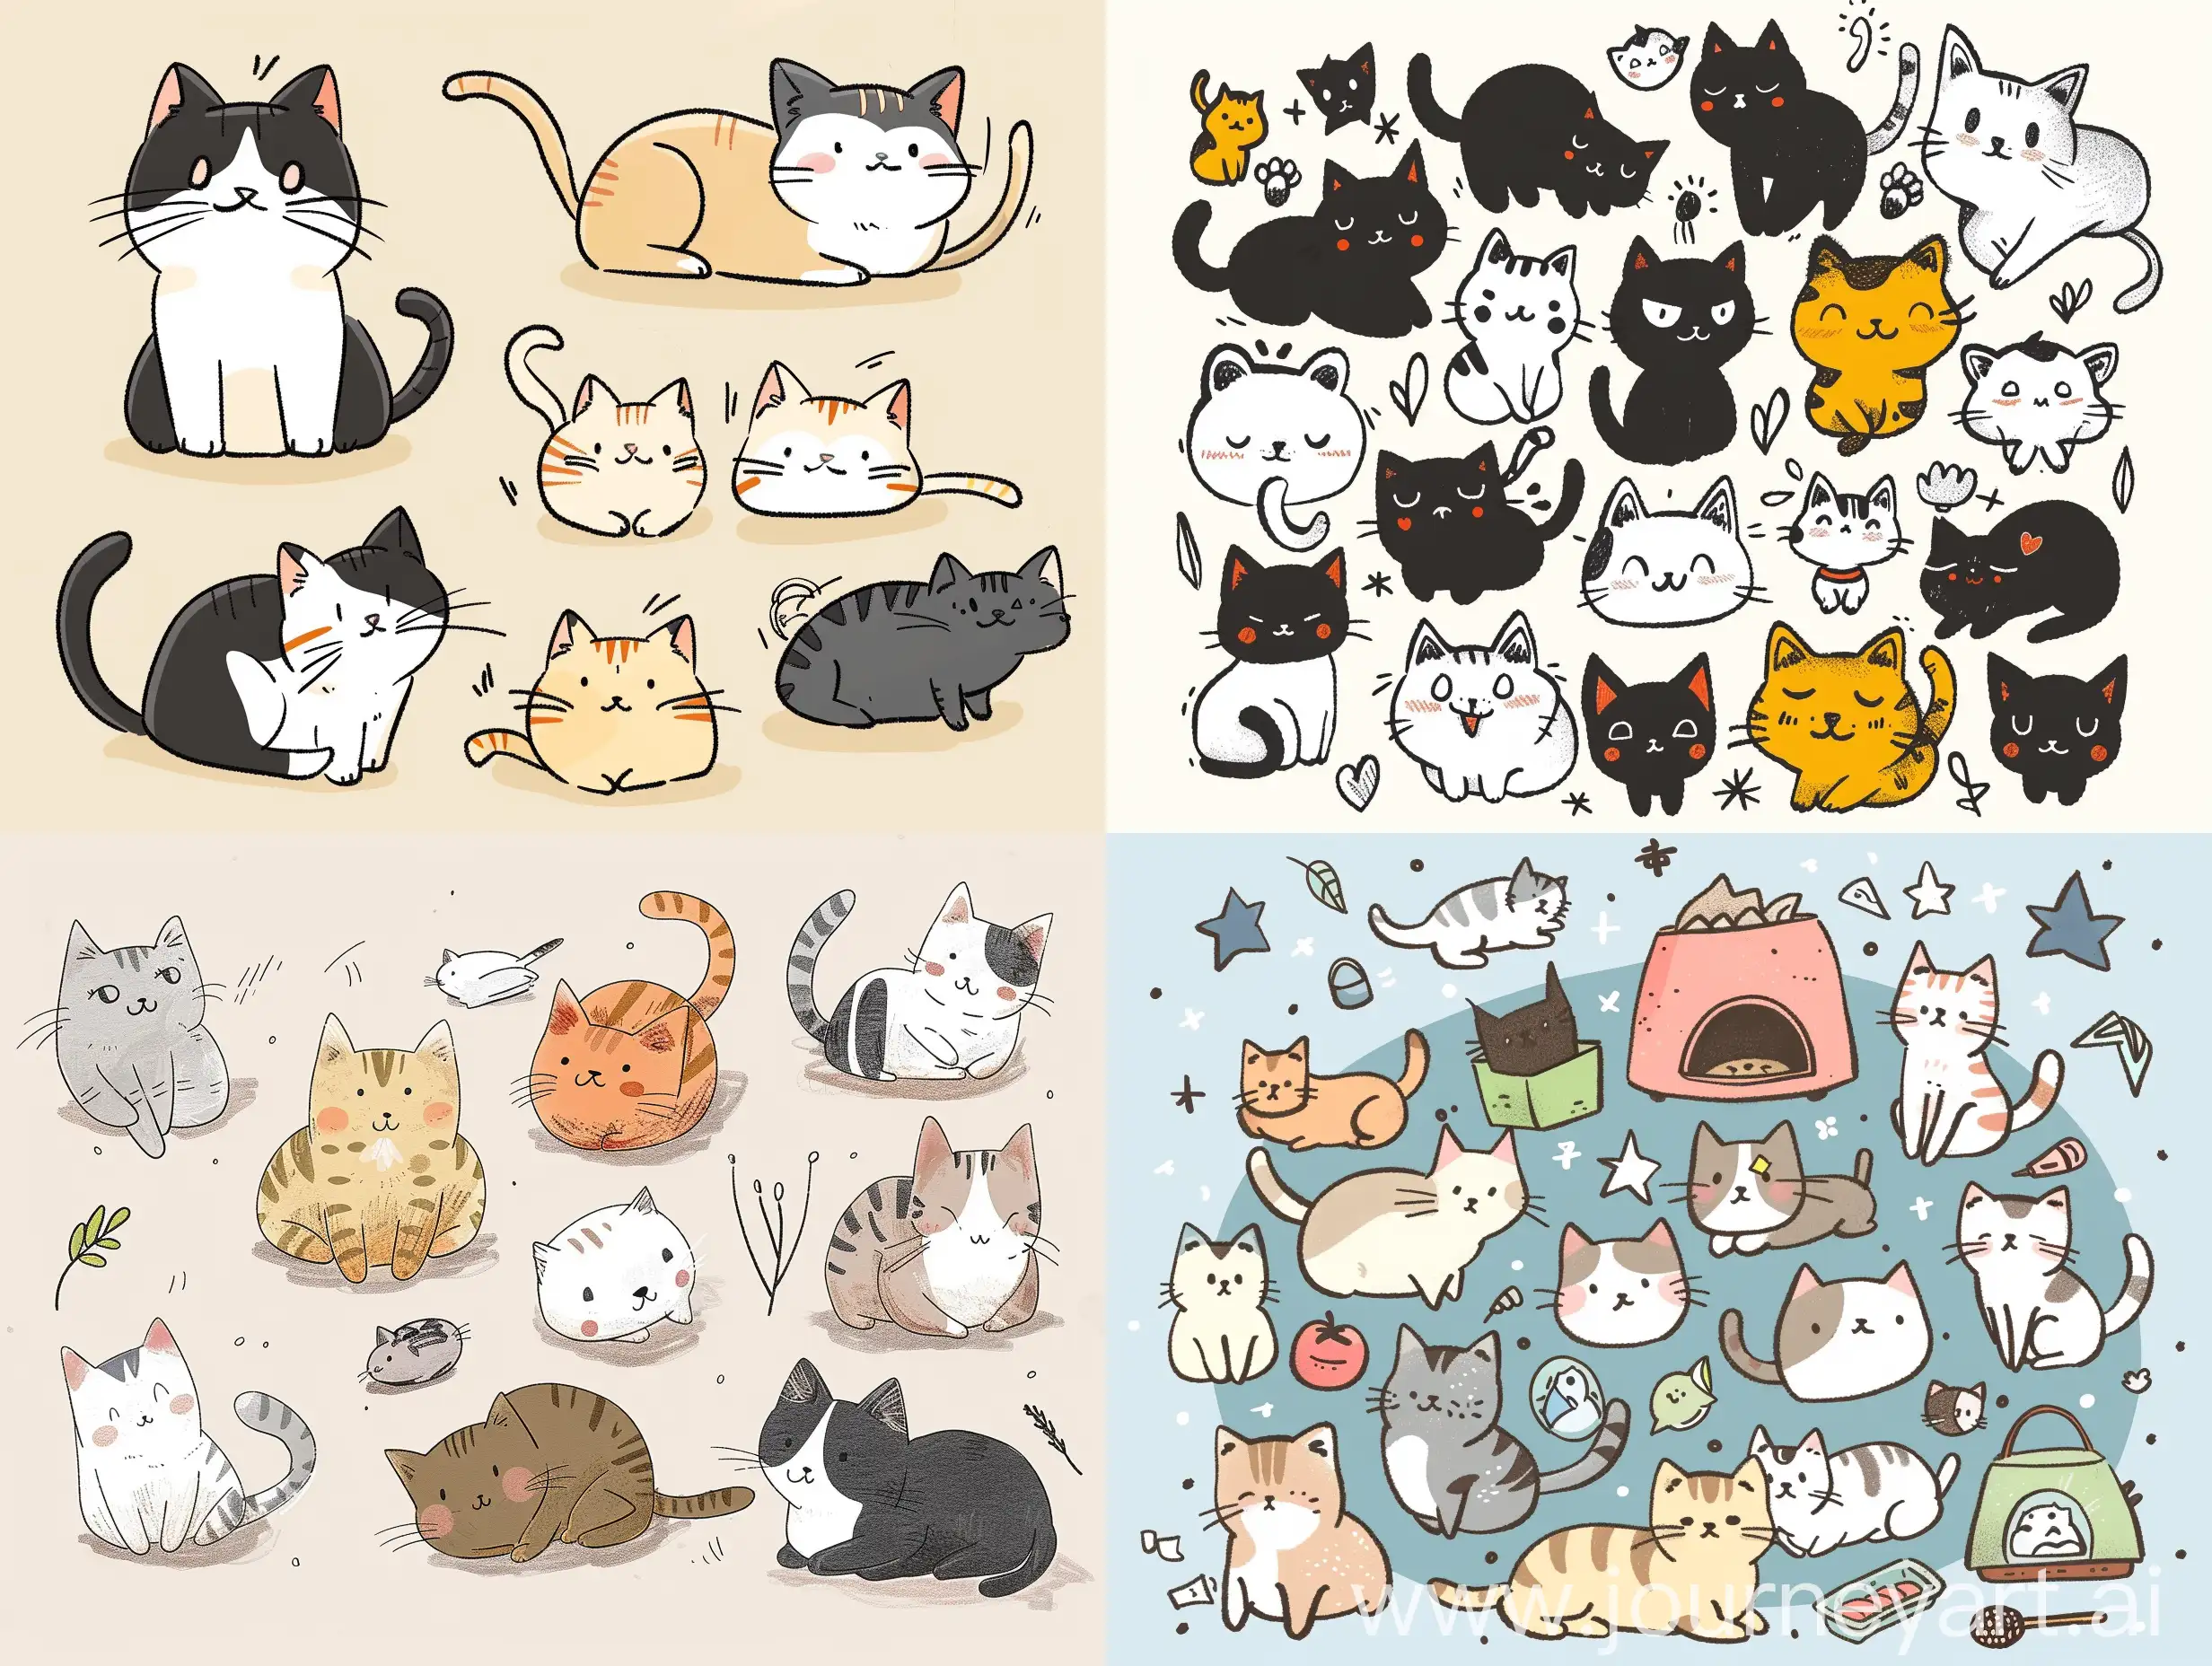 Adorable-DoodleStyle-Cats-in-a-JapaneseInspired-Scene